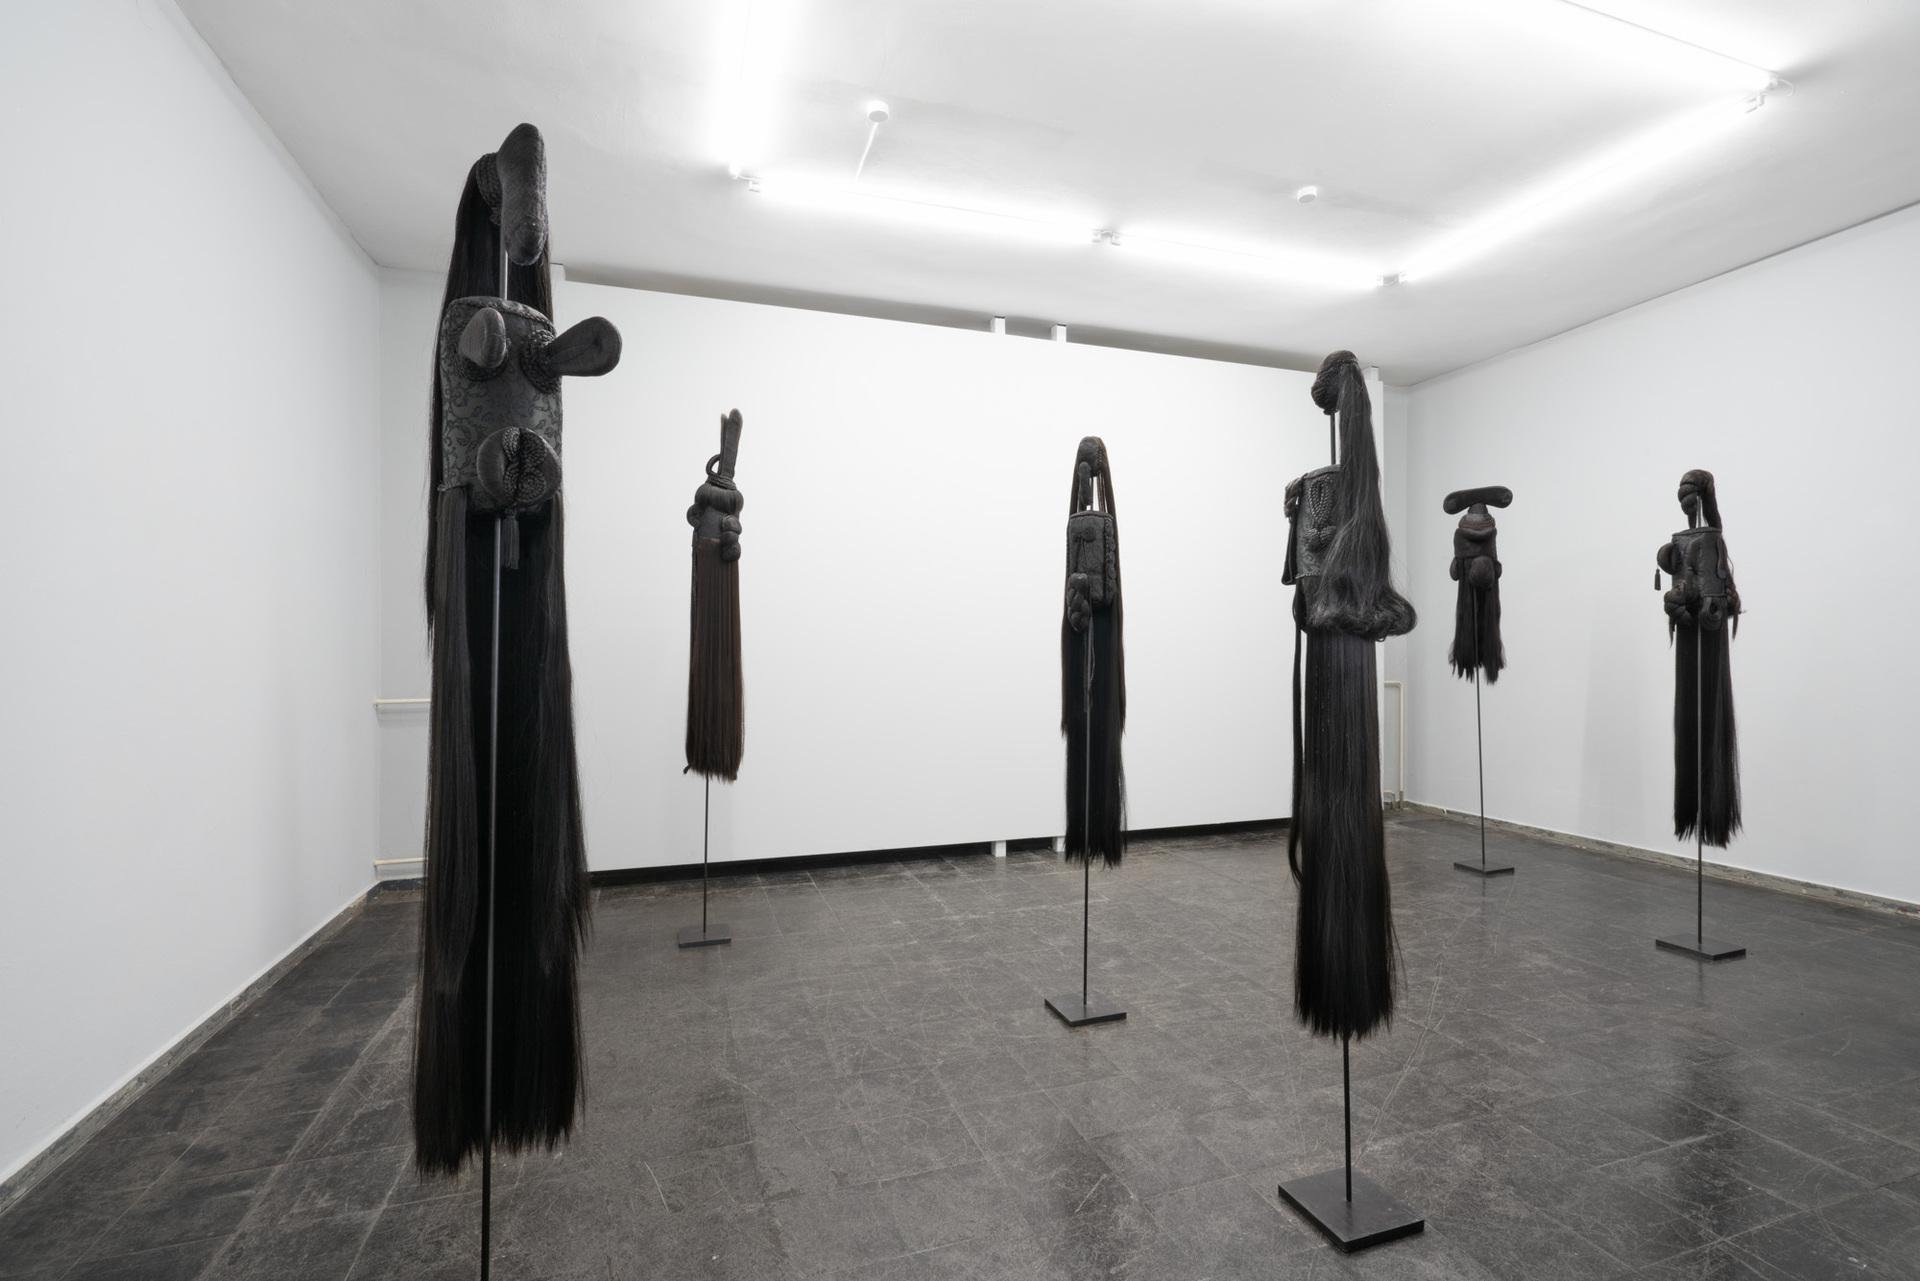 Installation view of sculptures Synthetic hair, fabric, fiberfill and metal   From left to right MARIANNA IGNATAKI, Come to Me (Rose), 2018 Synthetic hair, fabric, fiberfill and metal 189x20x35cm  MARIANNA IGNATAKI, The Blind Boy, 2018 Synthetic hair, fabric, polyester fiberfill and metal 215x23x26cm  MARIANNA IGNATAKI, Le Parisien, 2018 Synthetic hair, fabric, polyester fiberfill and metal 190x20x20cm  MARIANNA IGNATAKI, The Pretty Lady, 2018 Synthetic hair, fabric, thread, polyester fiberfill and metal 183x20x20cm  MARIANNA IGNATAKI, The Duck, 2018 Synthetic hair, fabric, polyester fiberfill and metal 202x34x26cm  MARIANNA IGNATAKI, The Witch, 2018 Synthetic hair, fabric, polyester fiberfill and metal 188x20x32cm